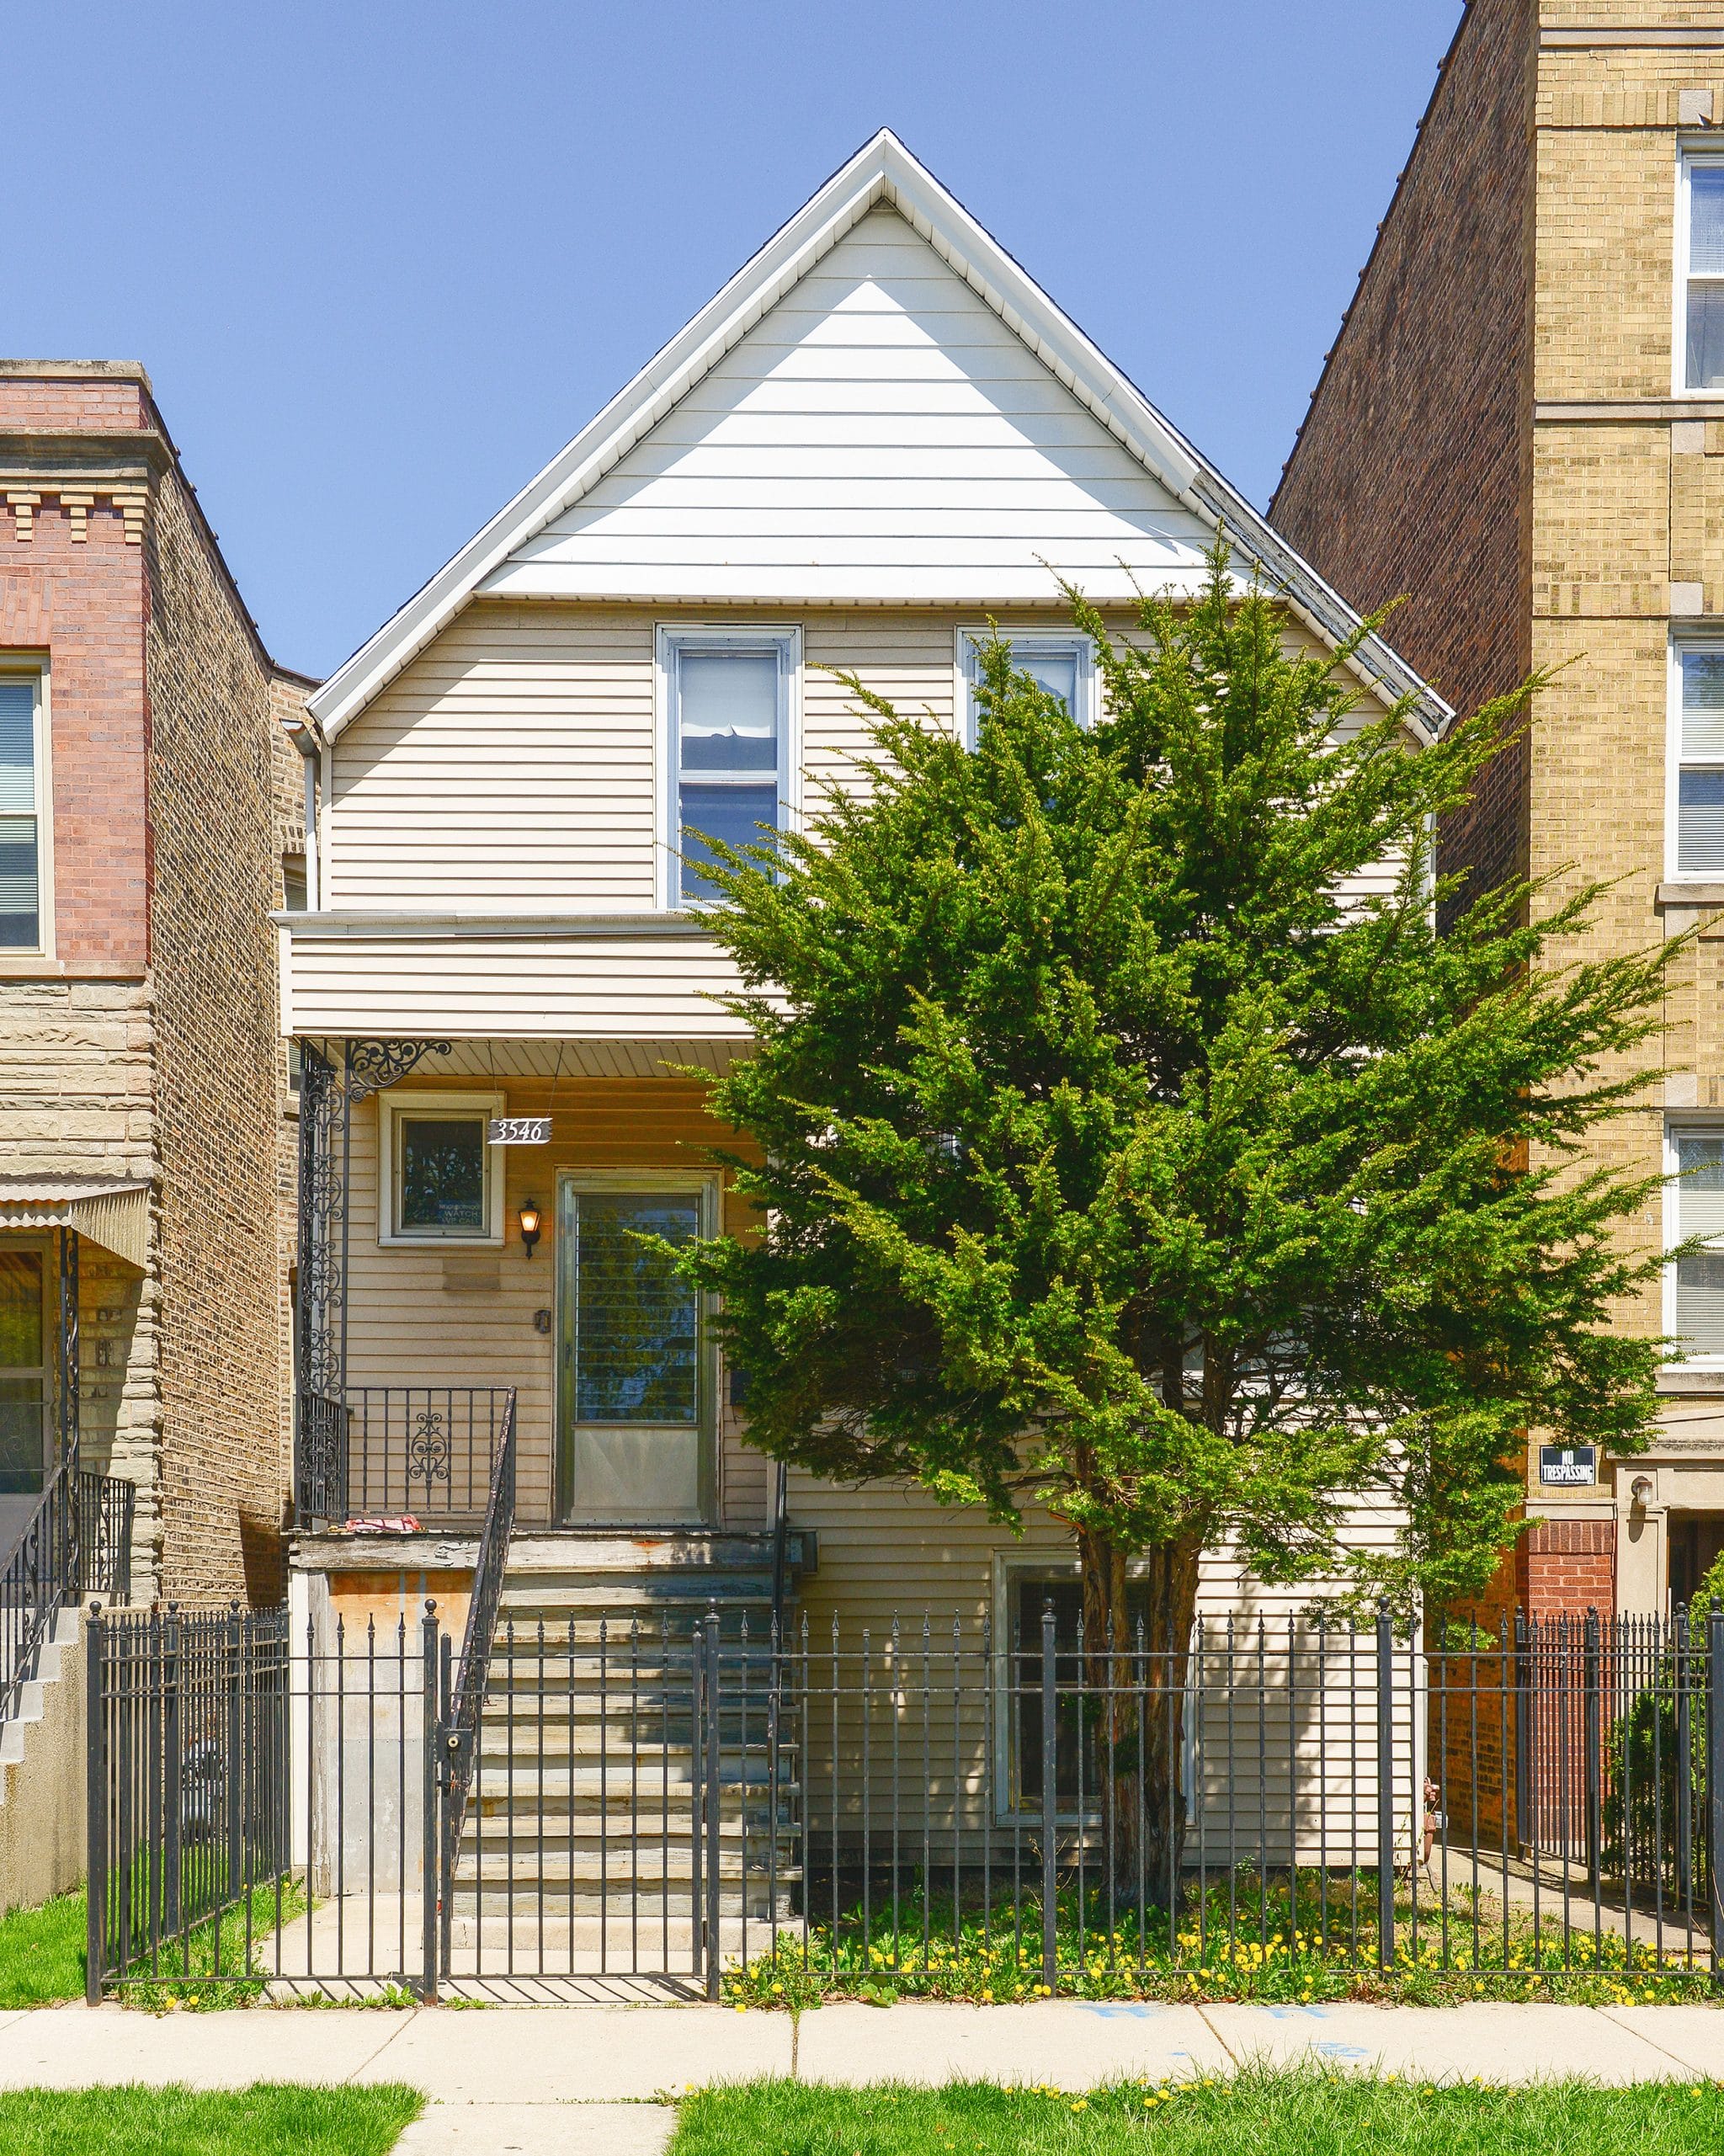 An overgrown tree blocks the front of a chicago two flat // via Yellow Brick Home